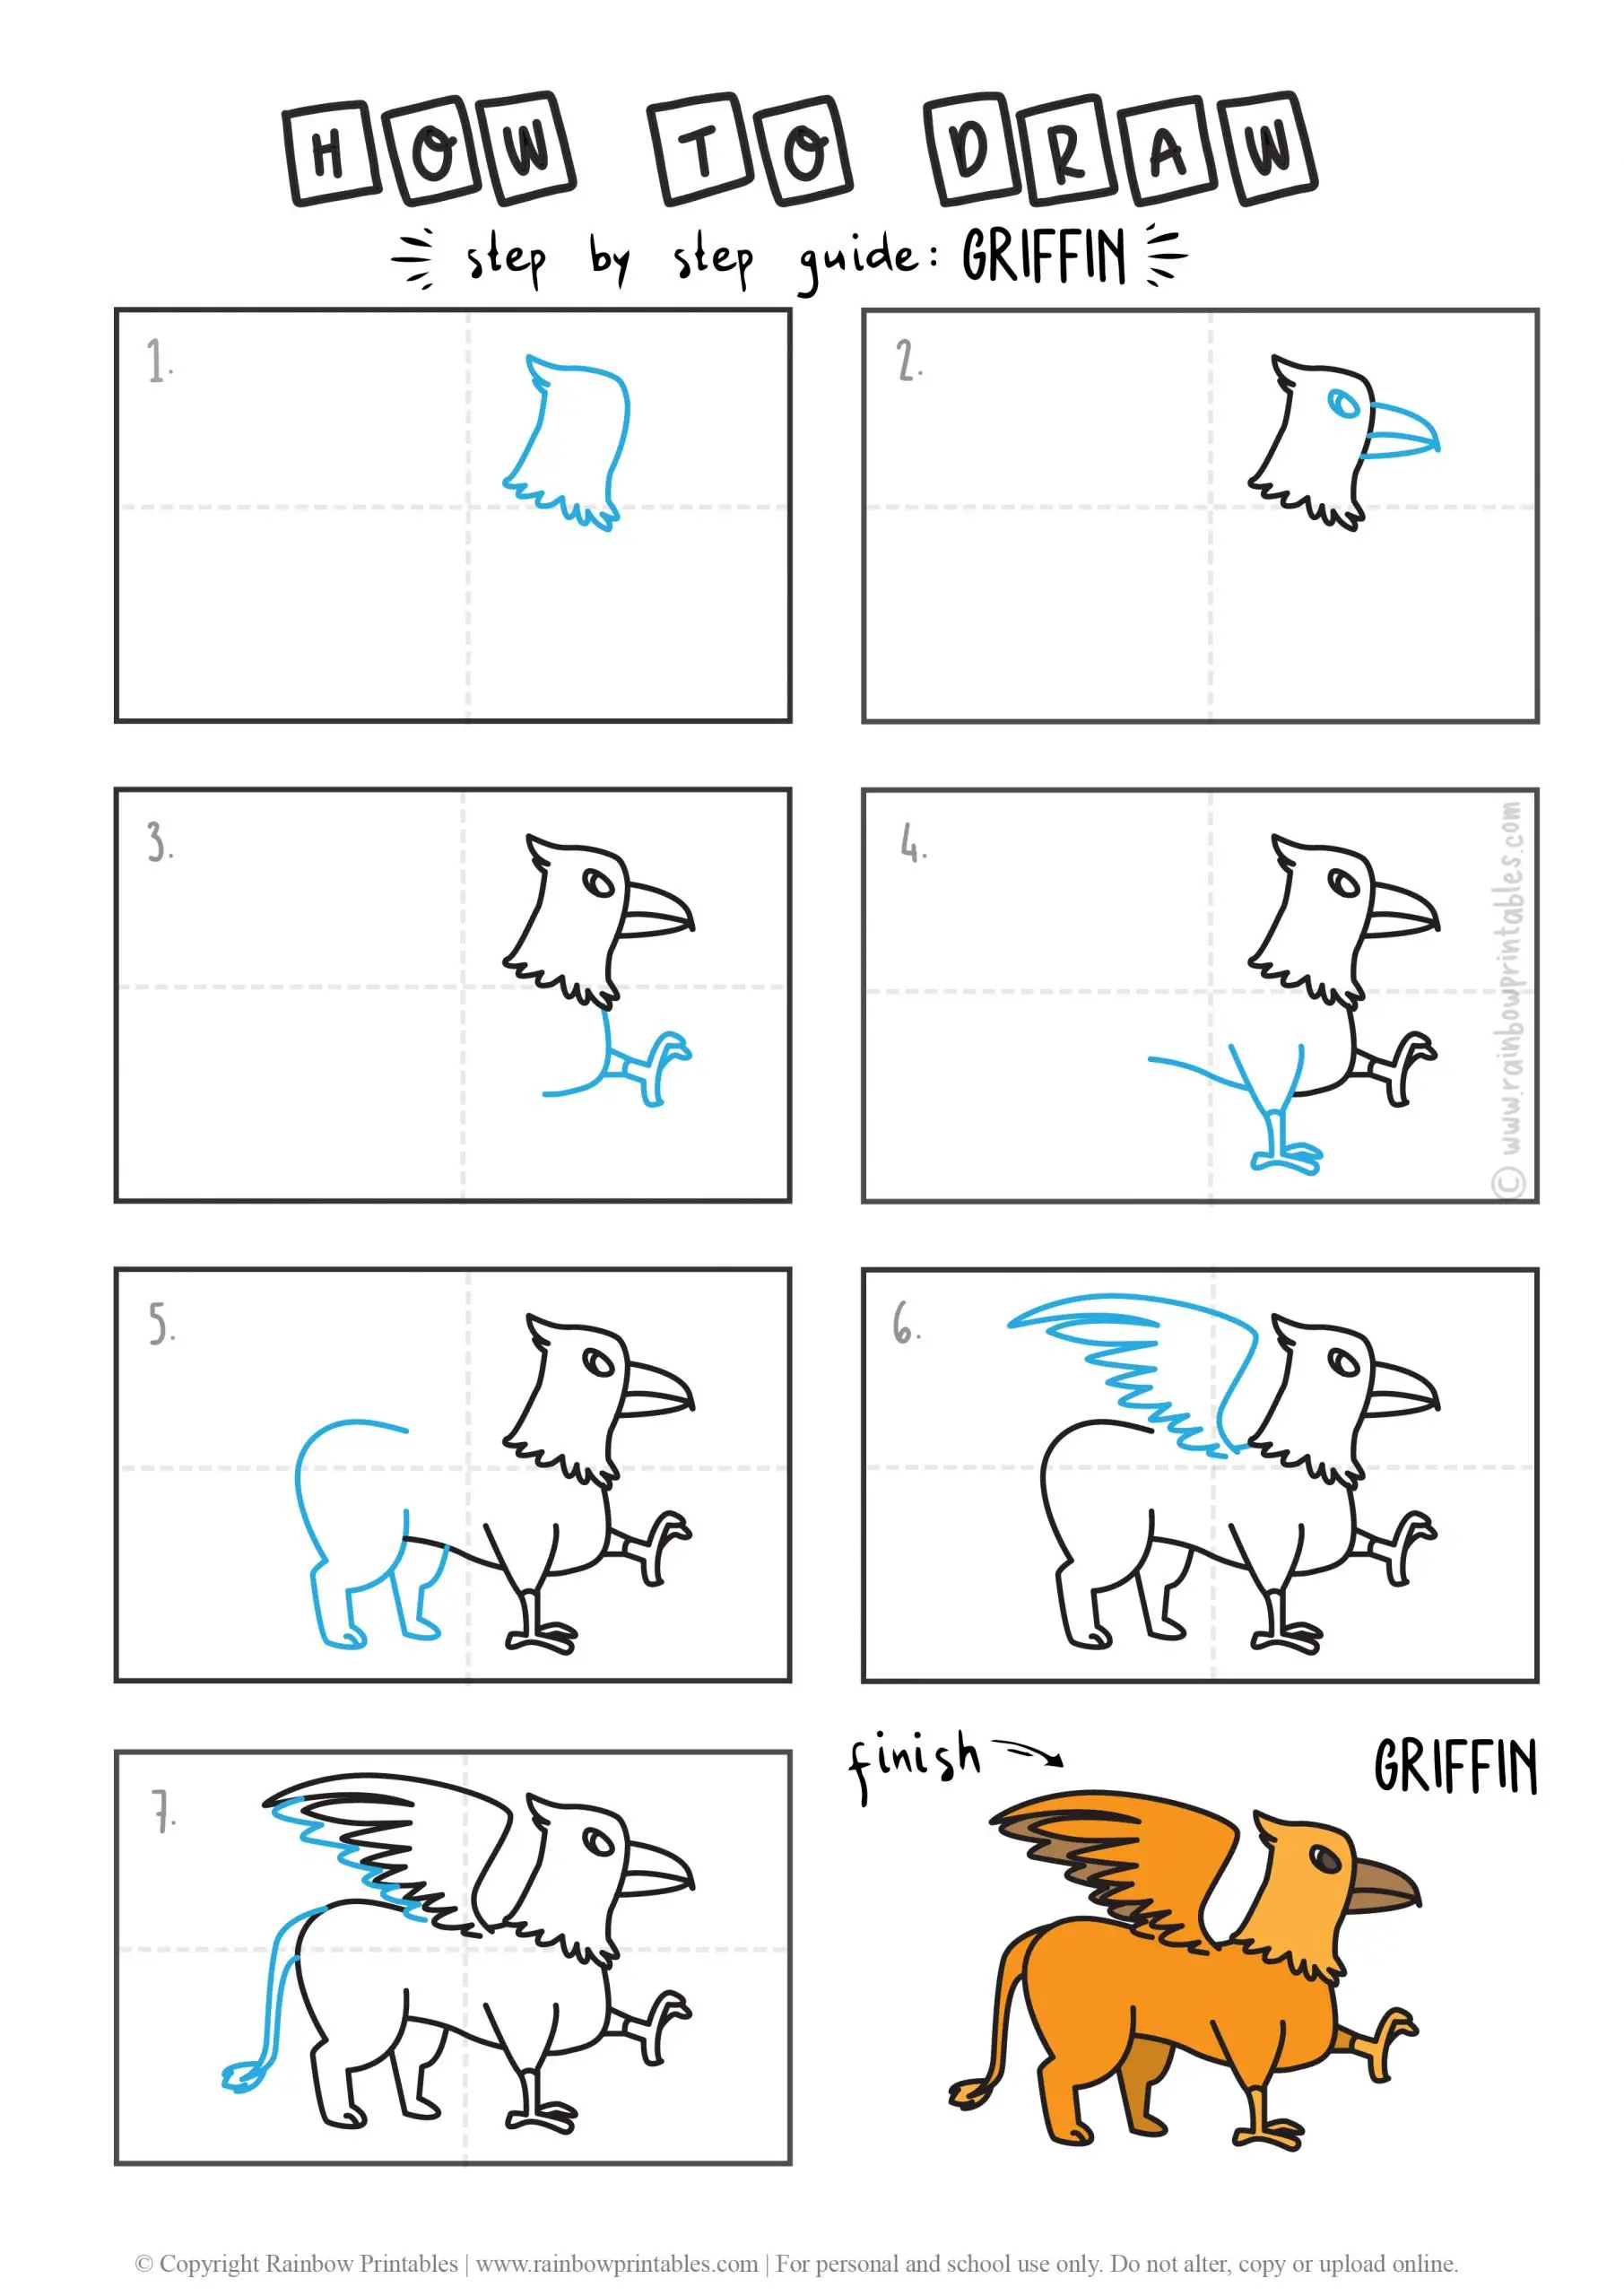 HOW TO DRAW A MYTH ANIMAL GRIFFIN GUIDE ILLUSTRATION STEP BY STEP EASY SIMPLE FOR KIDS